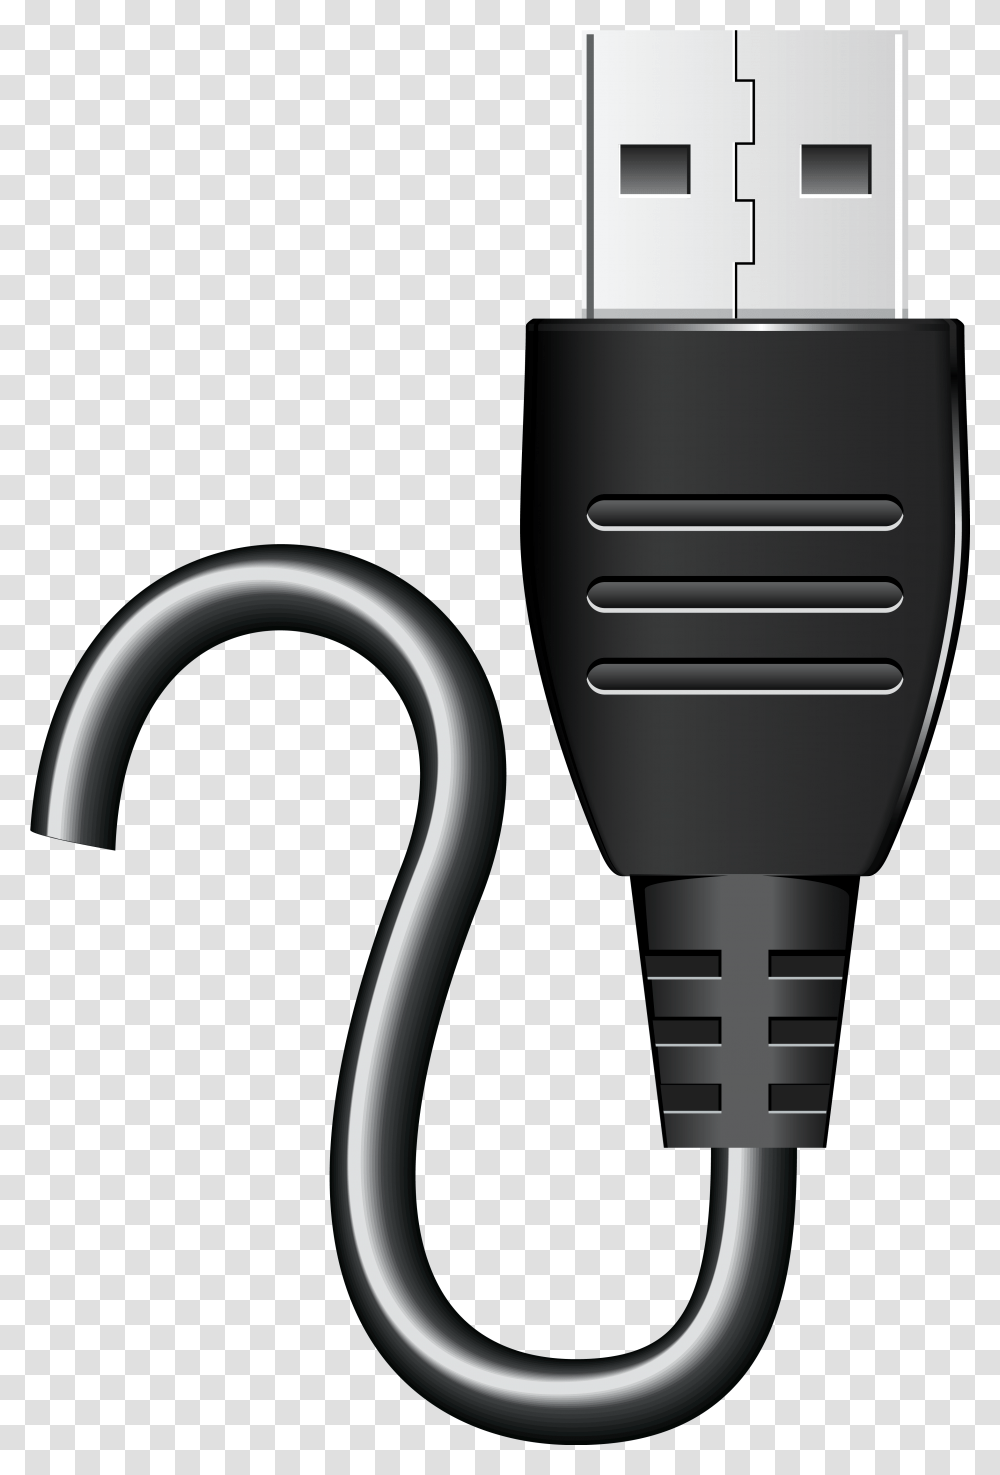 Usb Connector Clipart Usb Cable Clipart, Adapter, Electronics, Plug, Blow Dryer Transparent Png